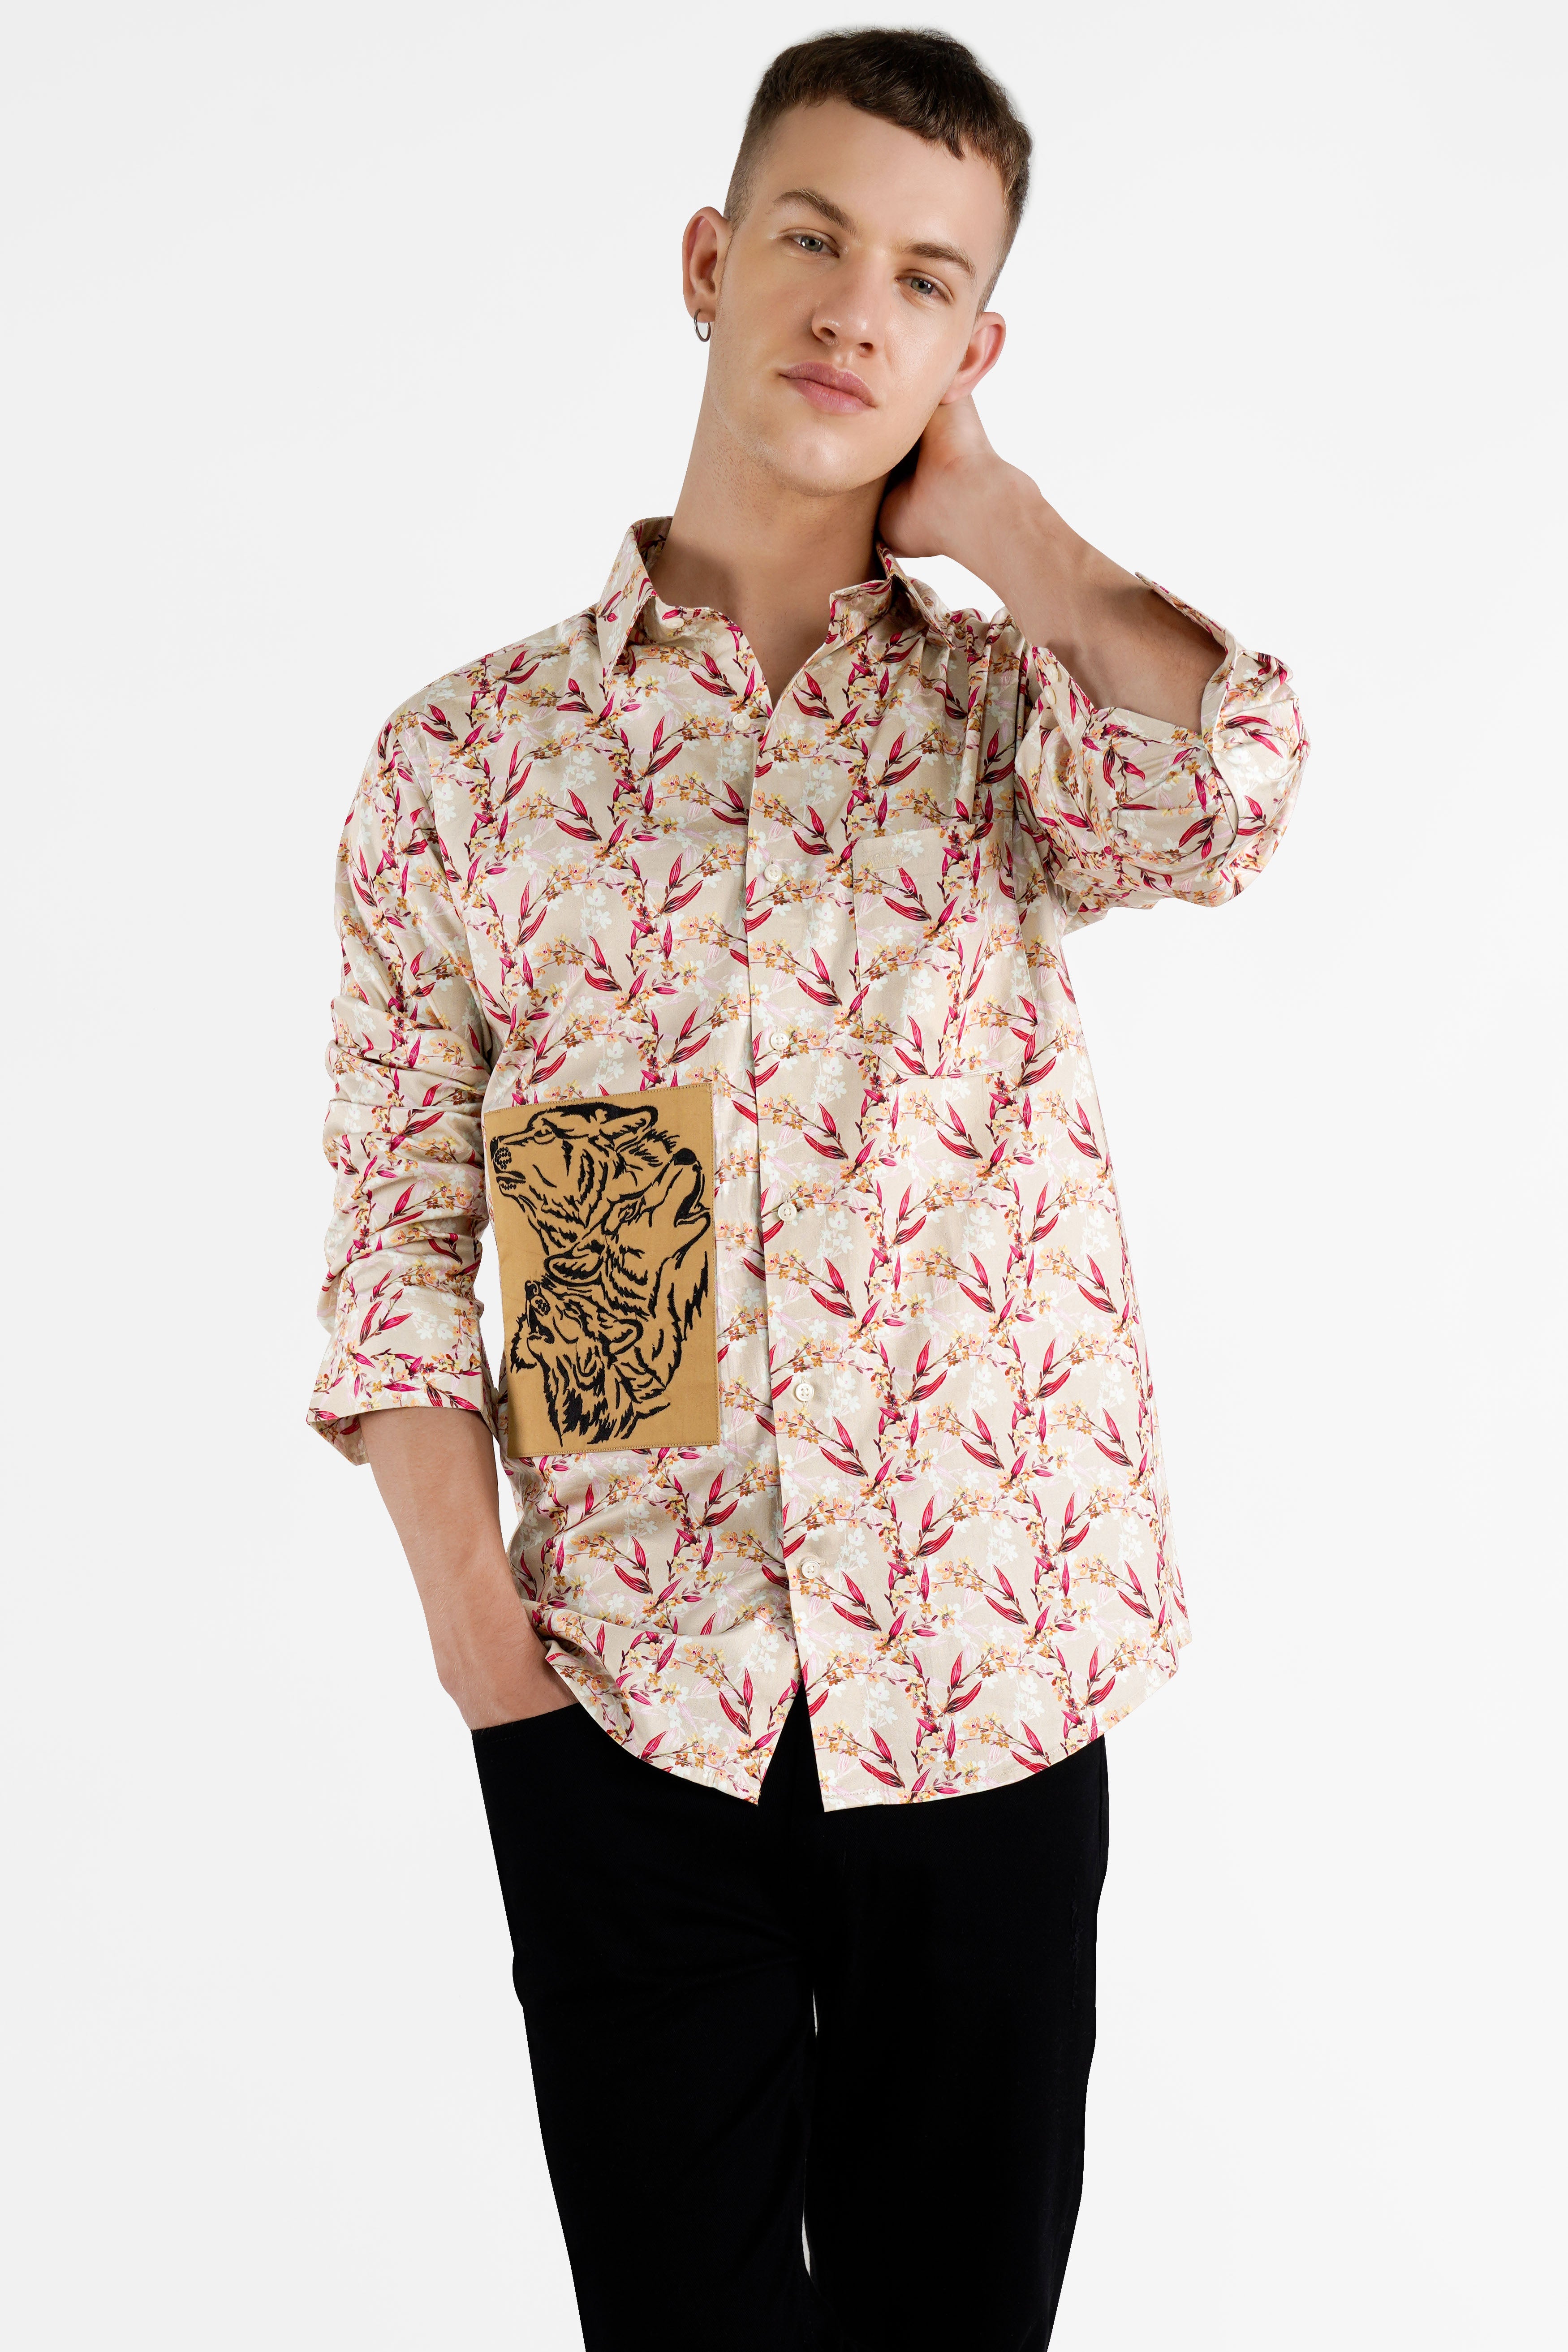 Bone Beige Leaves Printed with Dogs Embroidered Patch Work Super Soft Premium Cotton Designer Shirt